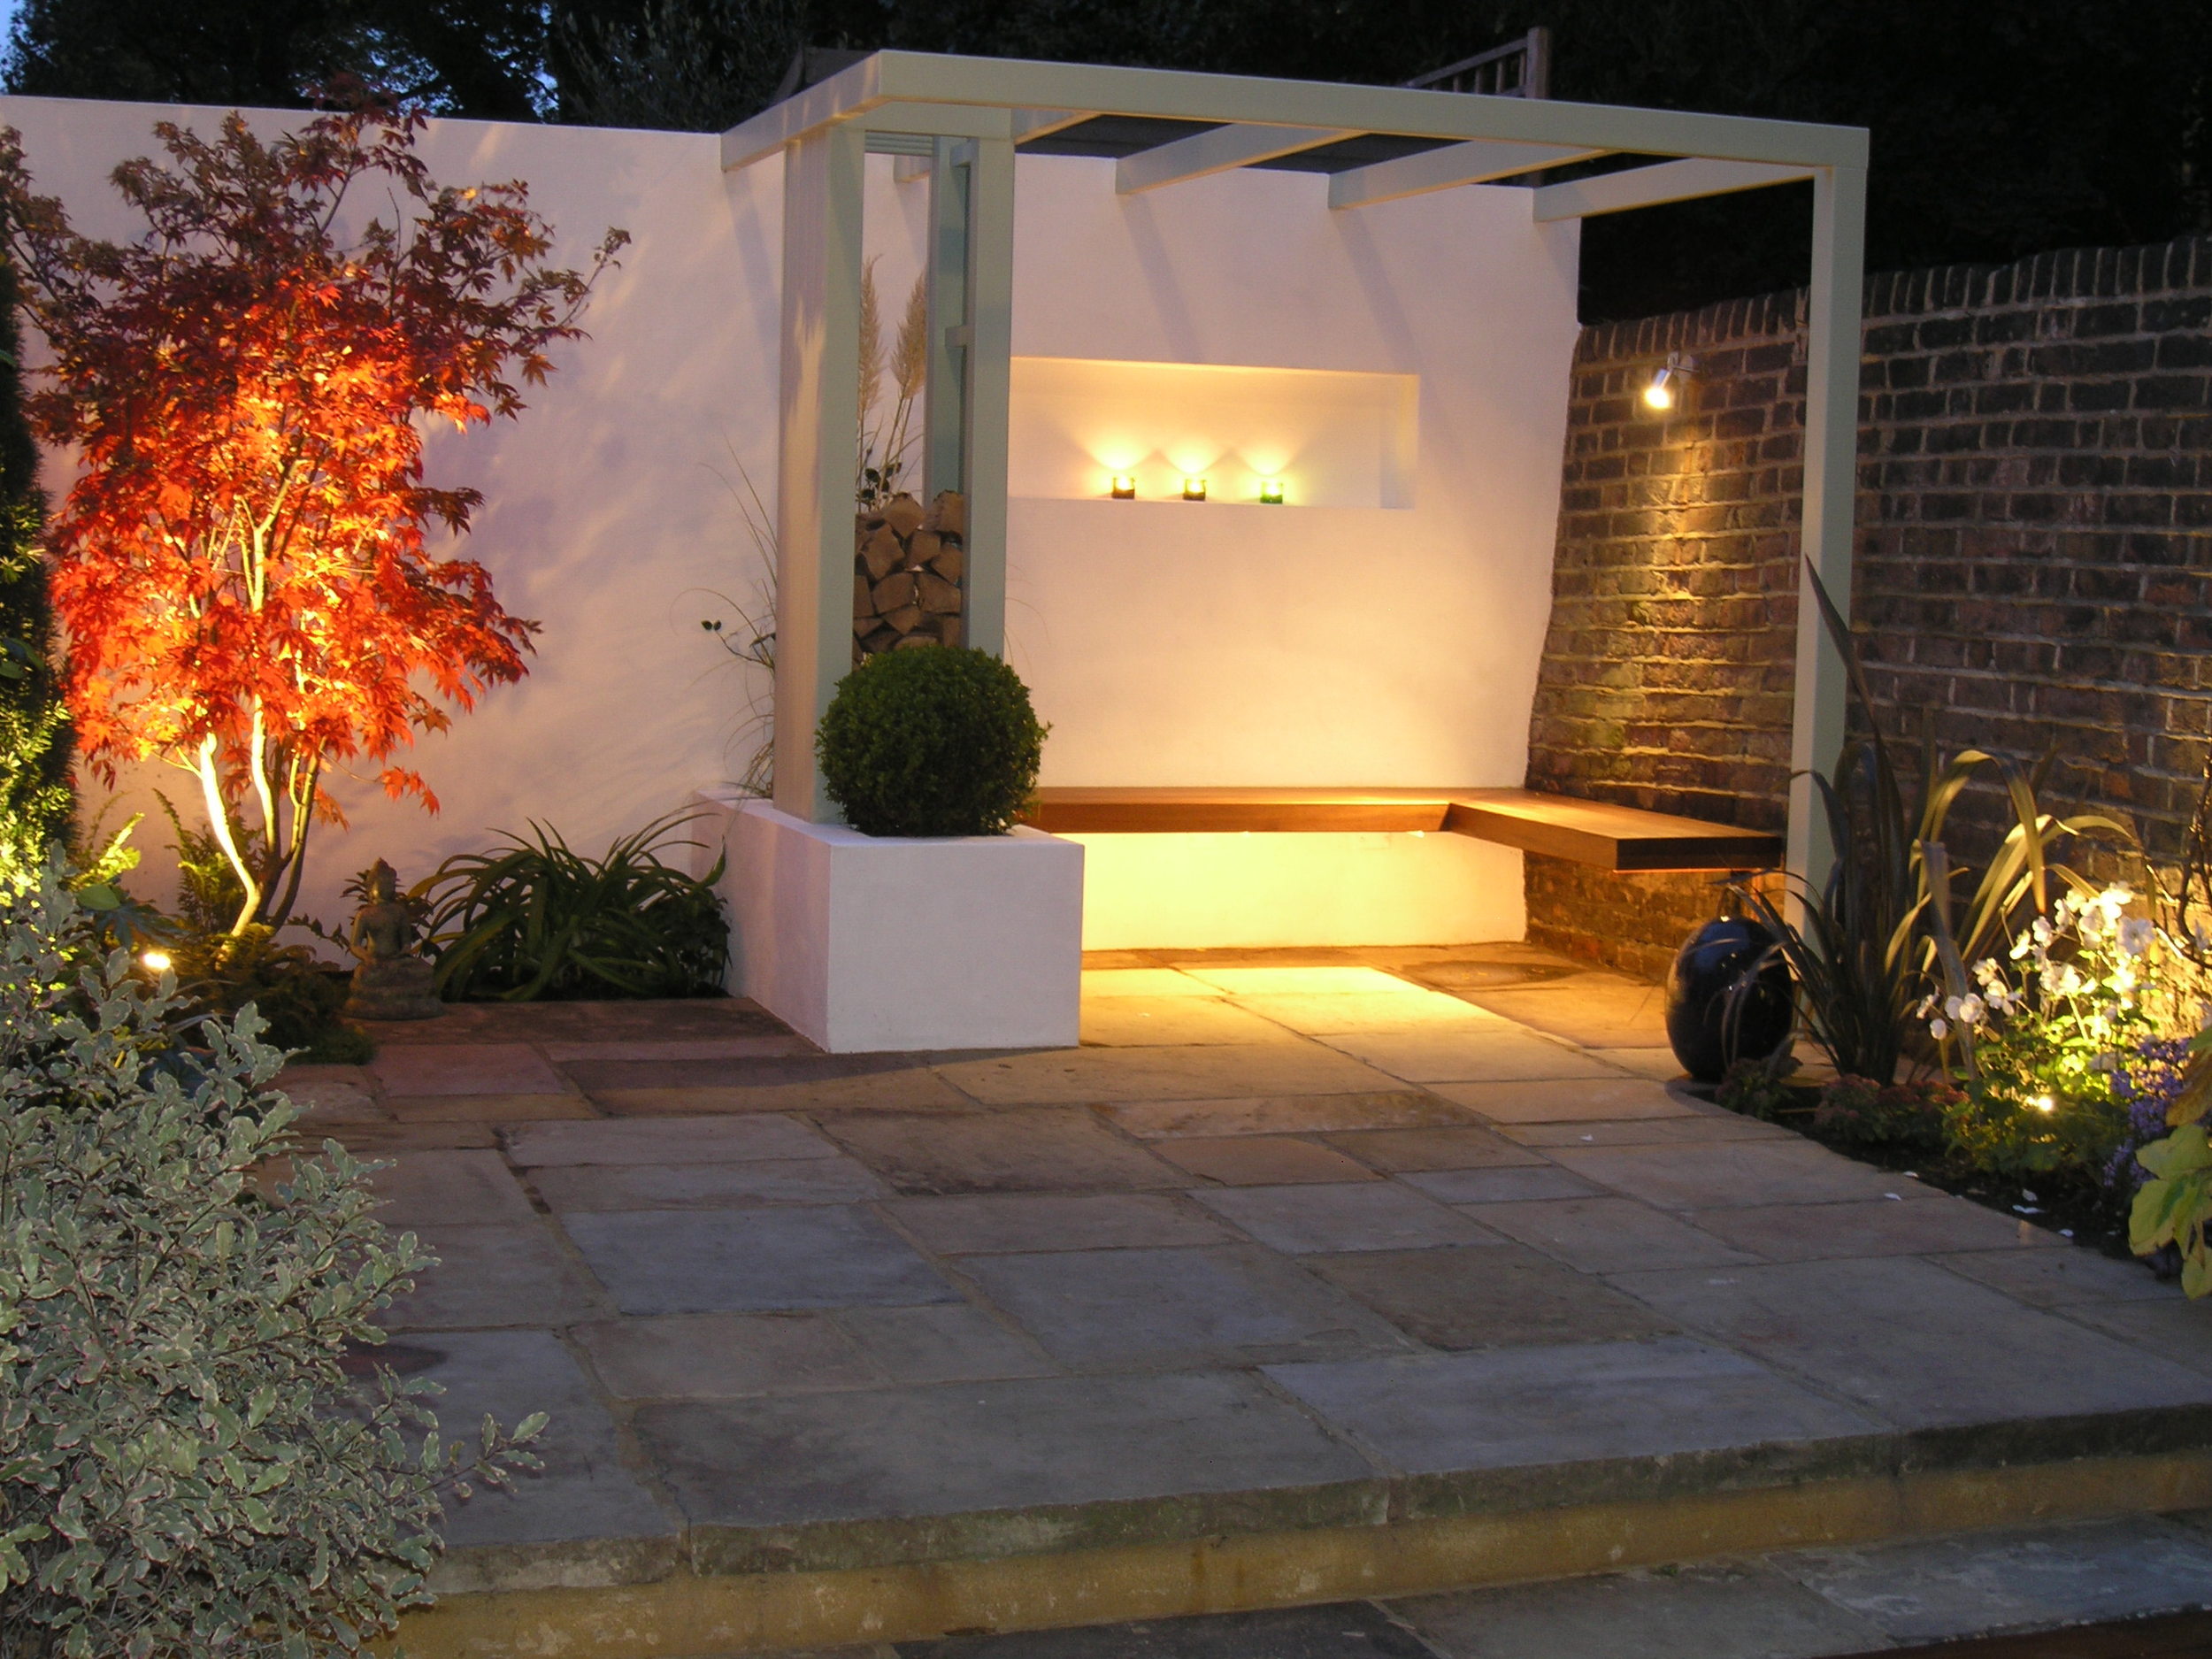 Bespoke garden design in N1 with Yorkstone patio and hardwood seating